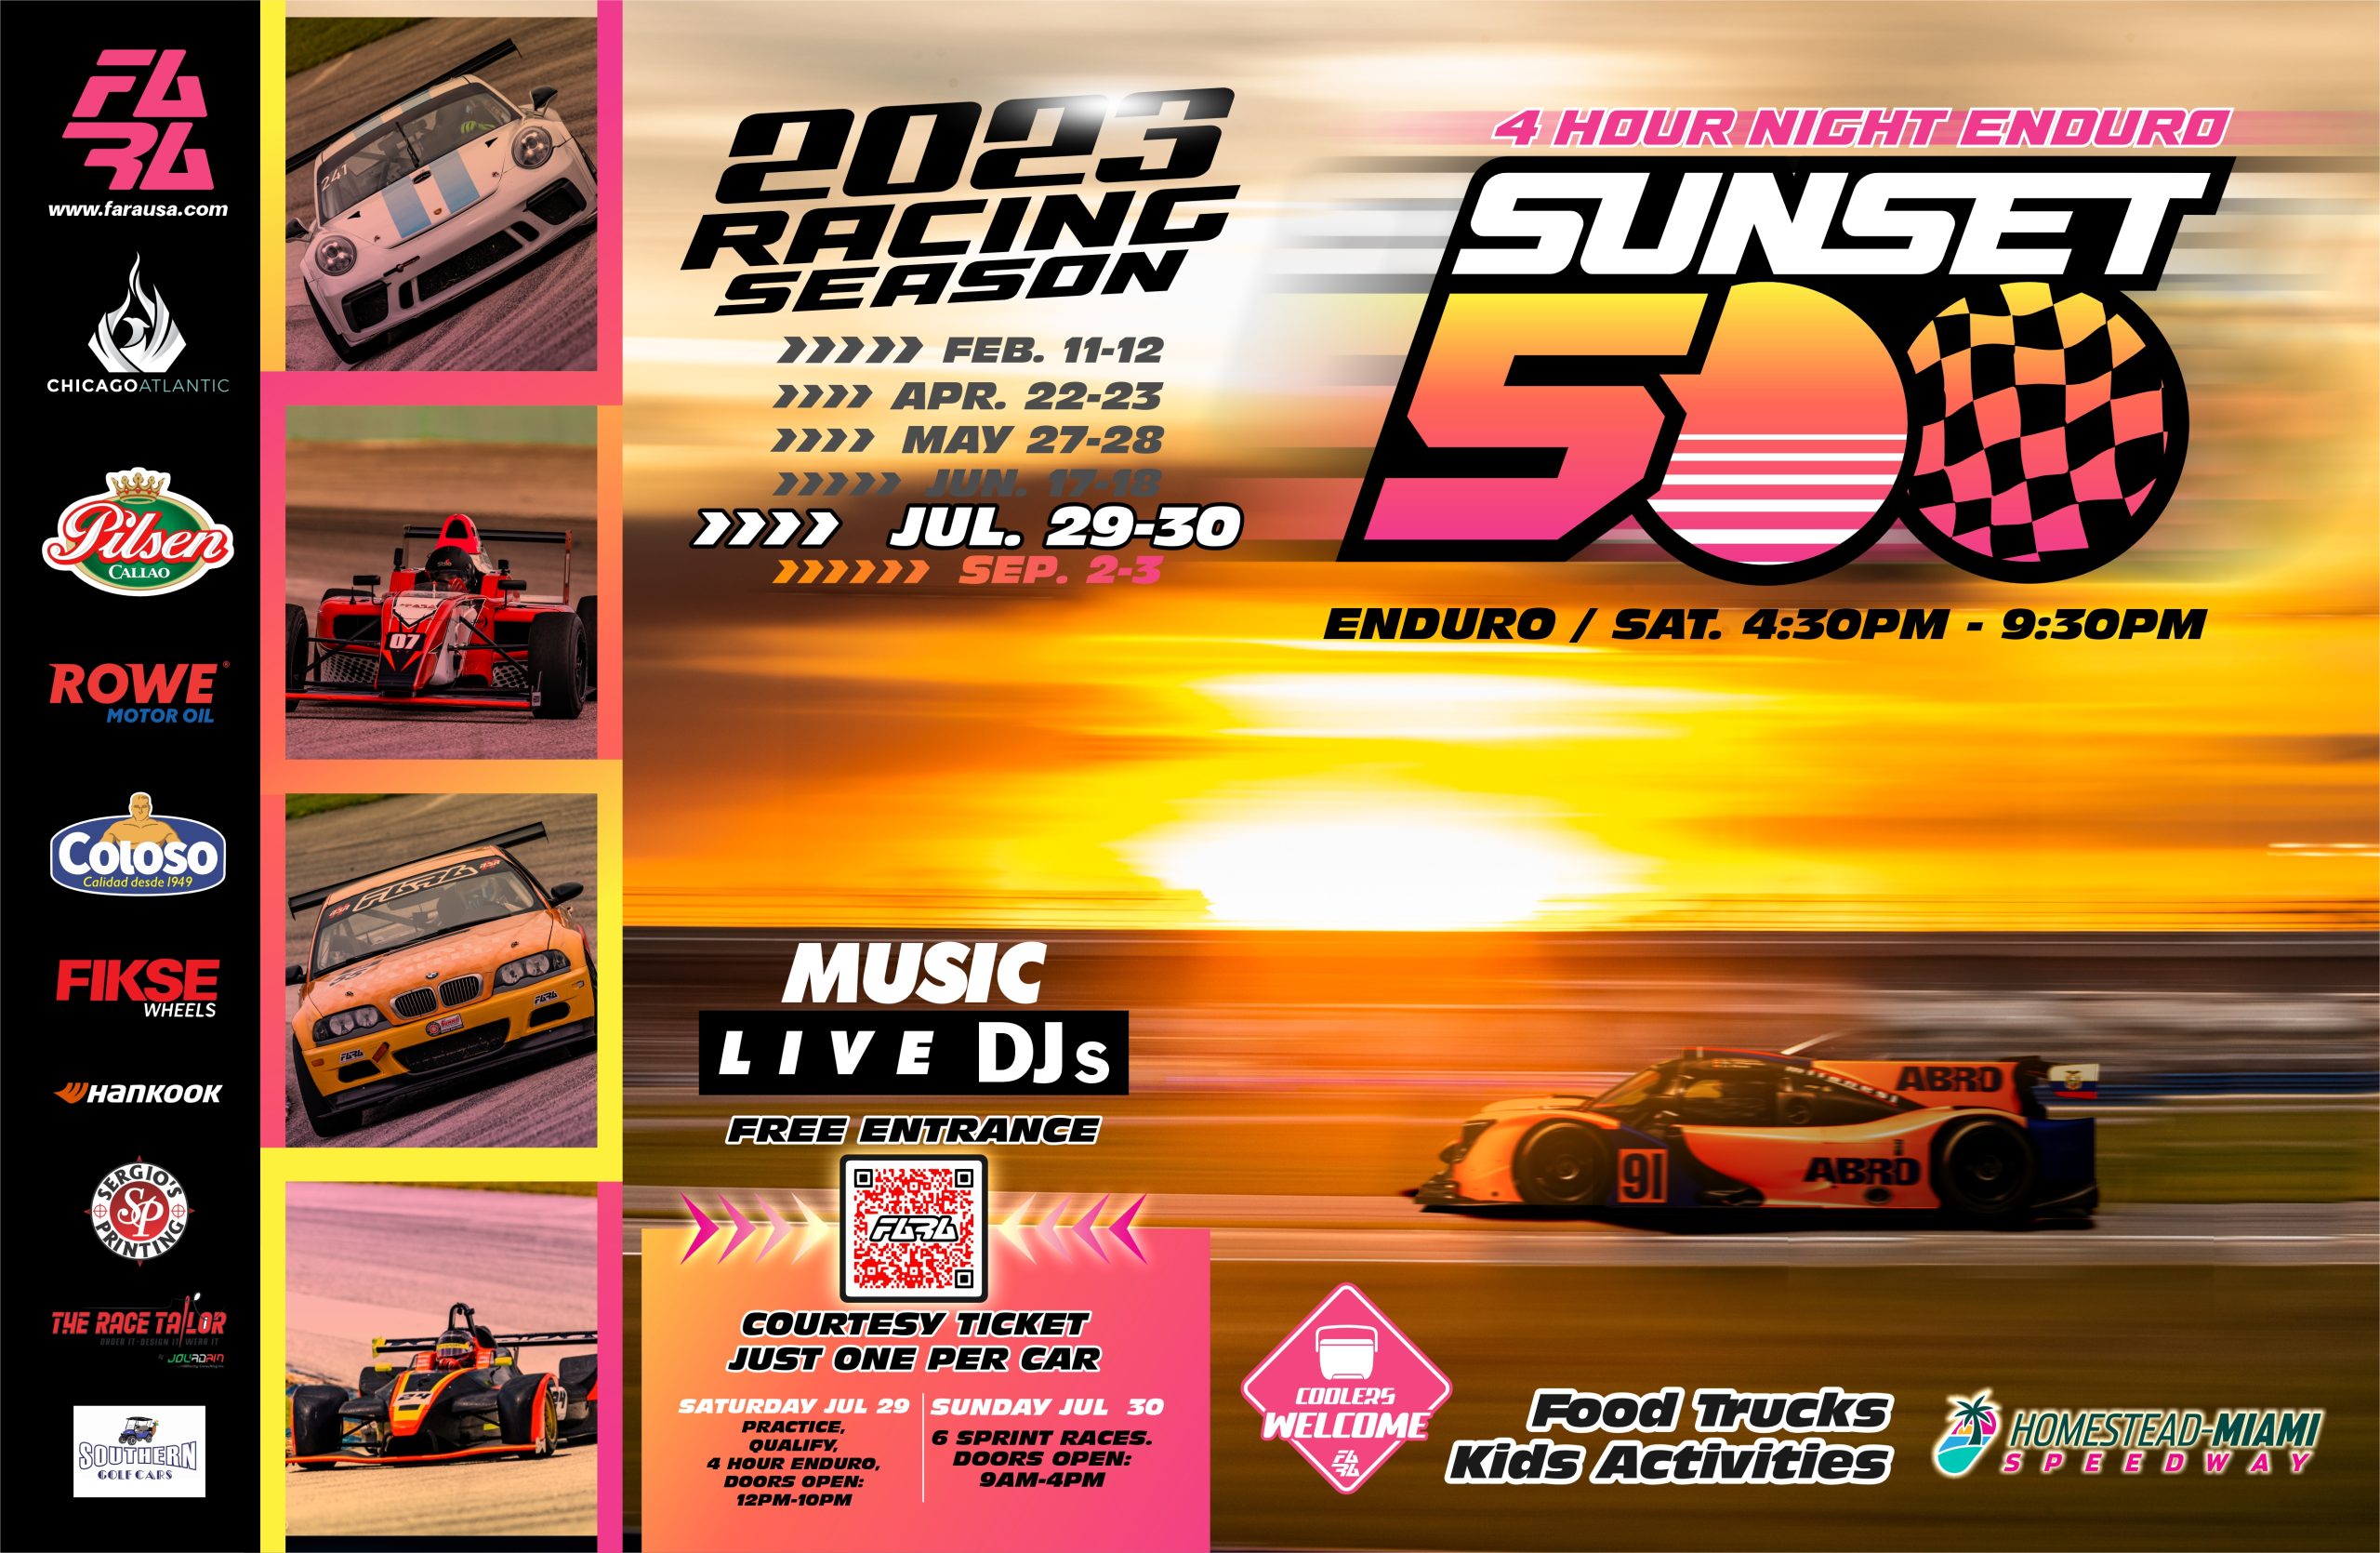 FARA USA high performance driving event SUNSET 500 at homestead miami speedway fun things to do for the family in miami